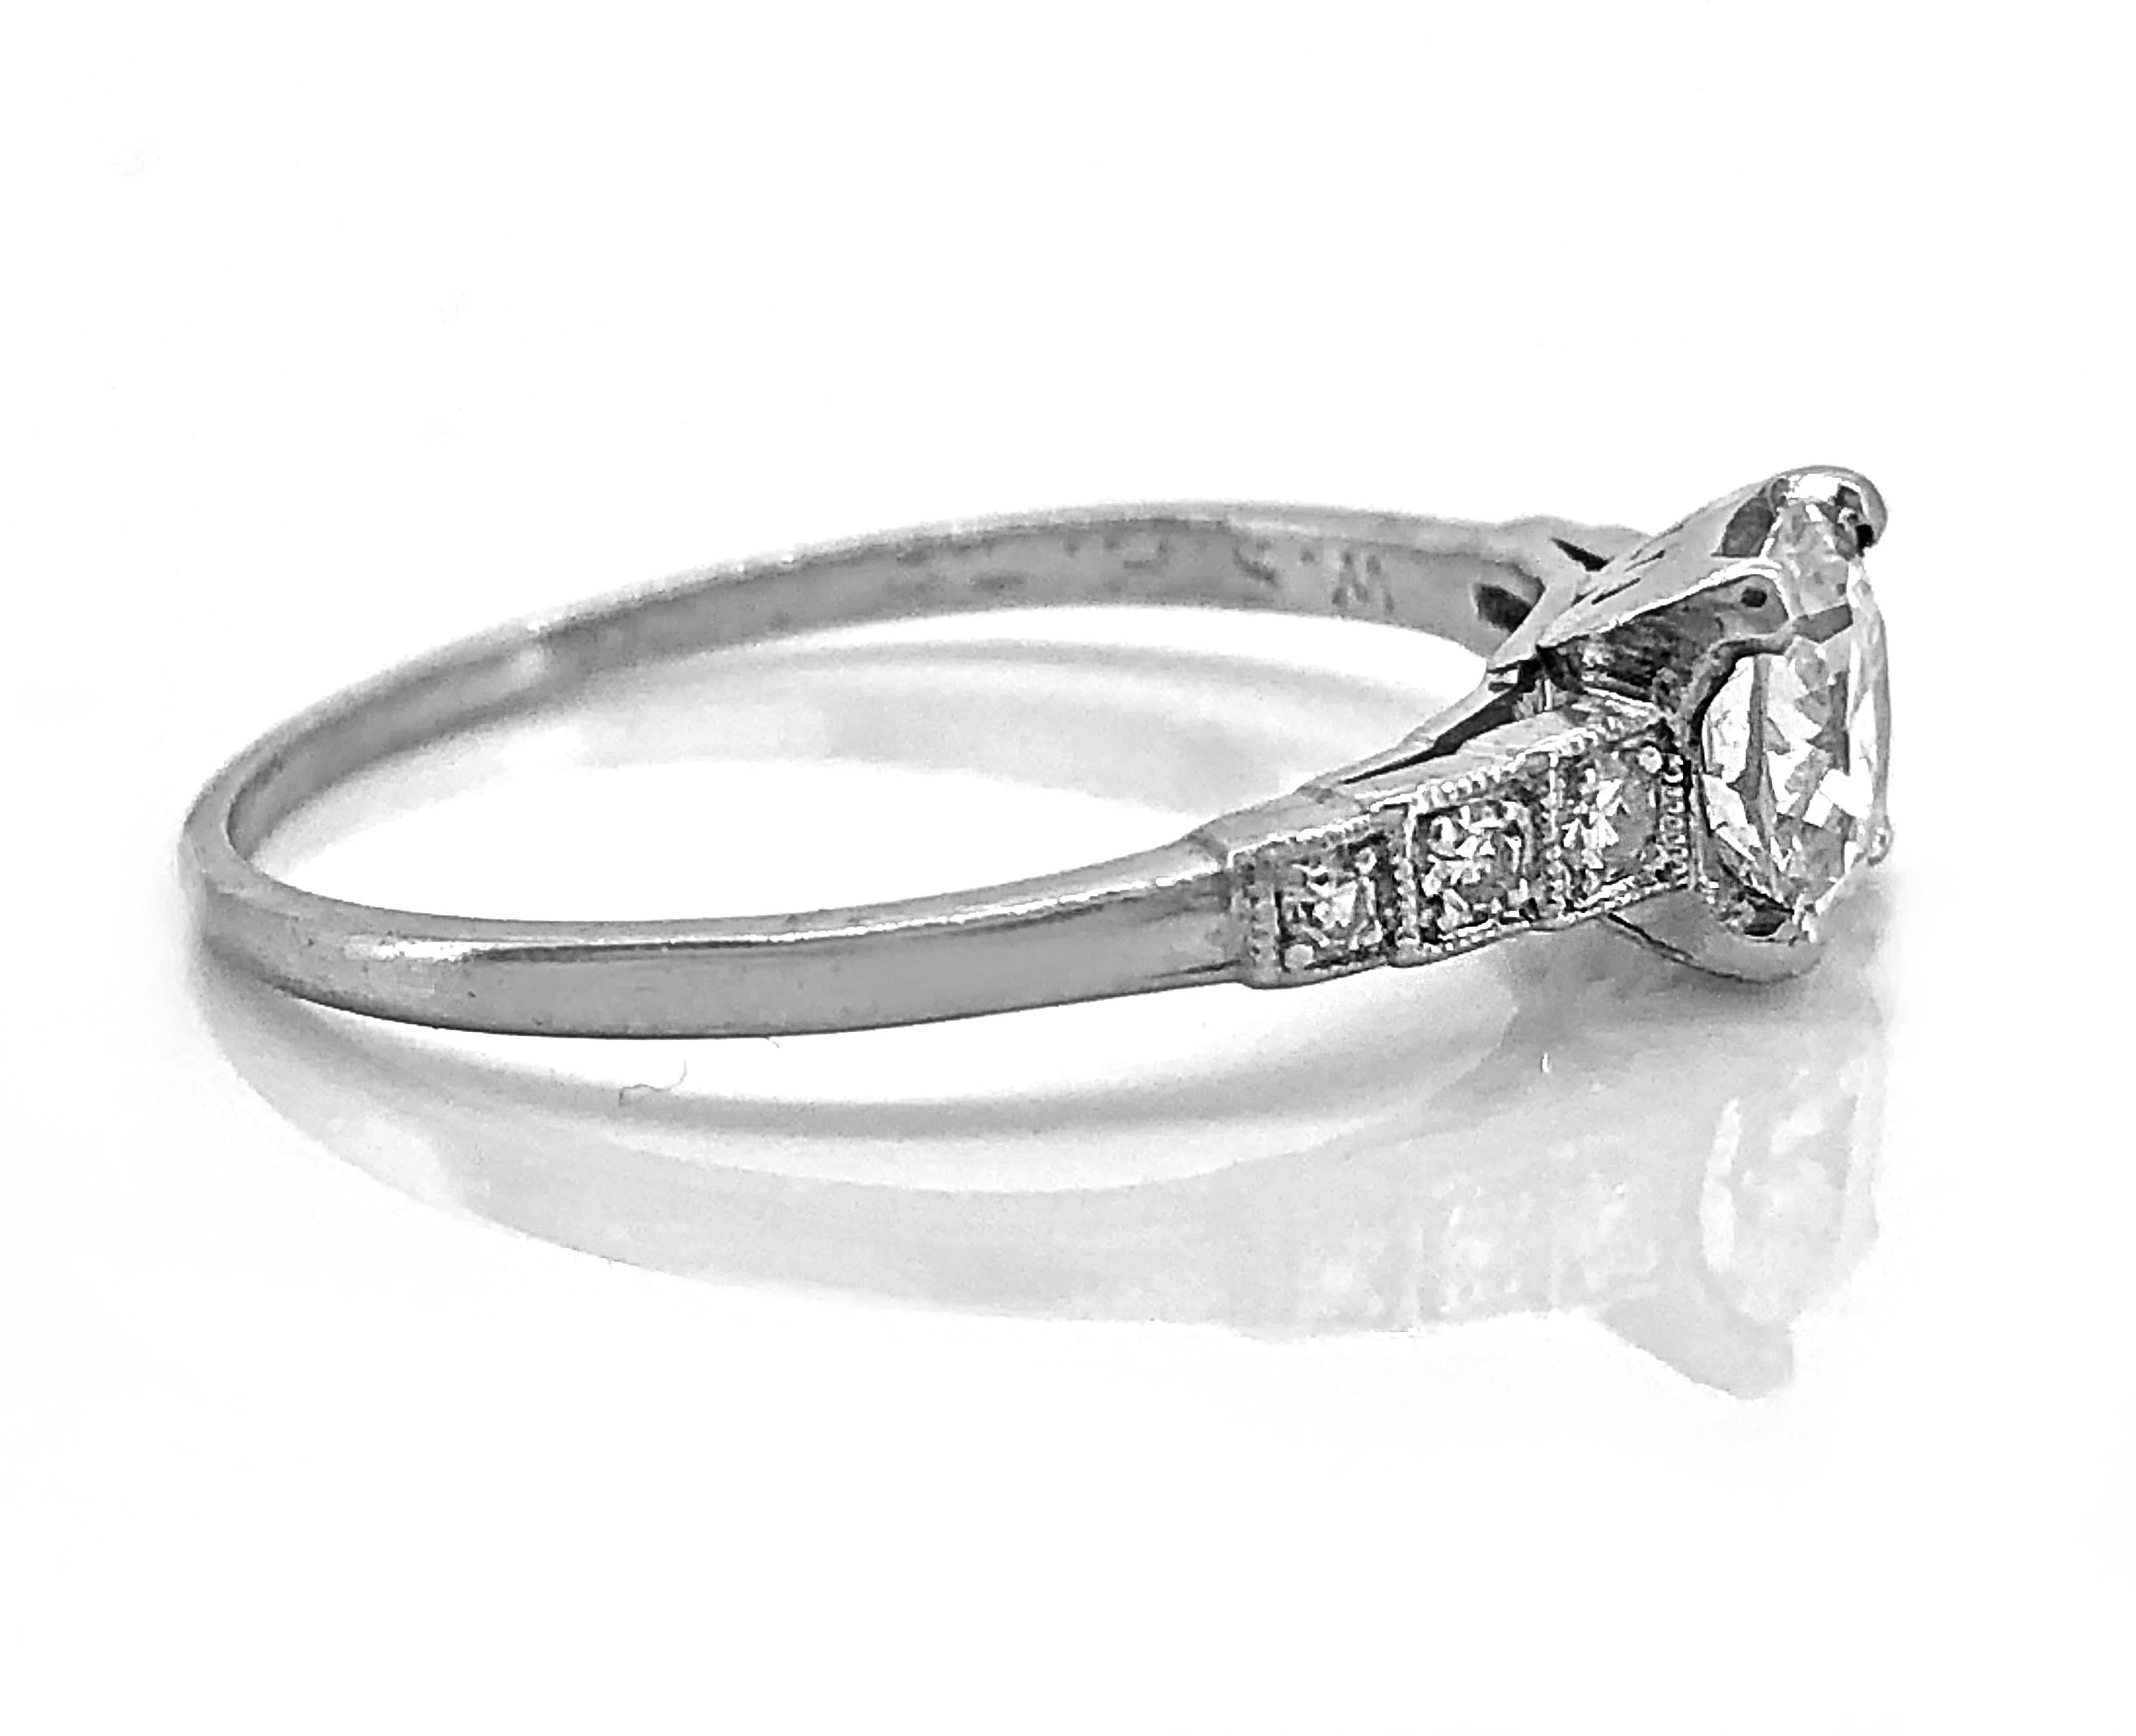 A stunning Art Deco Diamond & Platinum Antique Engagement Ring. It features a .53ct. European cut diamond with H-I color and VS1 clarity. It is accompanied with .06ct. T.W. apx. of sparkling single cut diamonds. This is a more traditional engagement